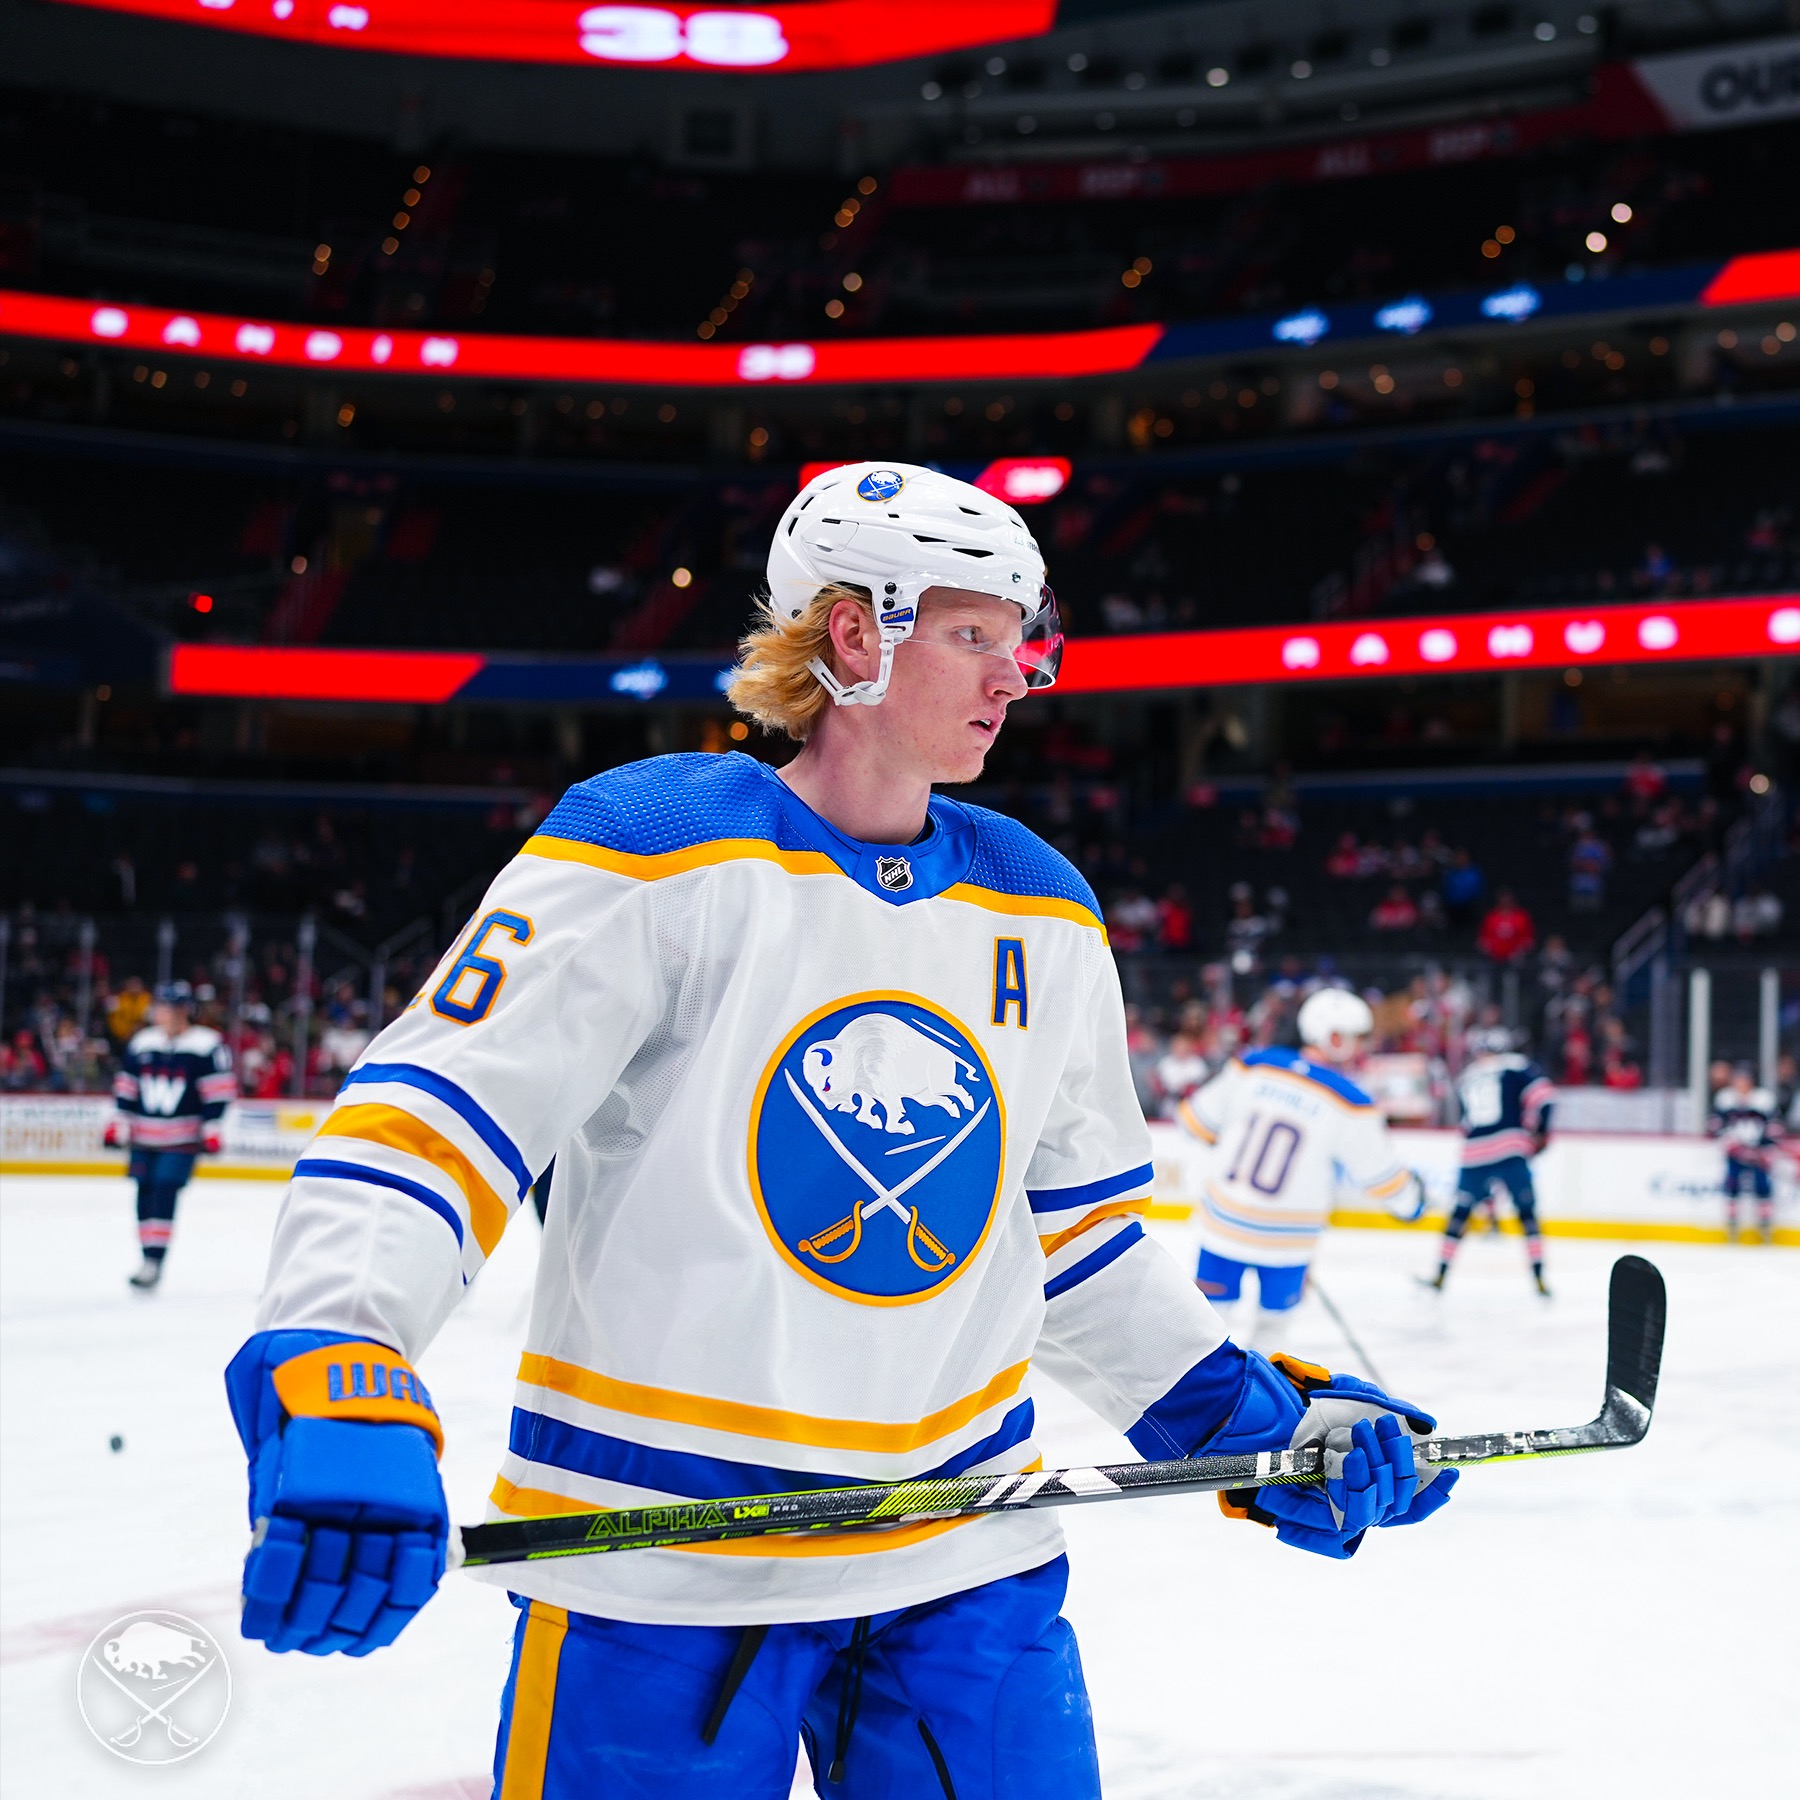 Rasmus Dahlin leads a youthful Sabres defensive corp. that's added key pieces as the Buffalo Sabres look to their continued rise in the NHL. - Photo Courtesy of the Buffalo Sabres